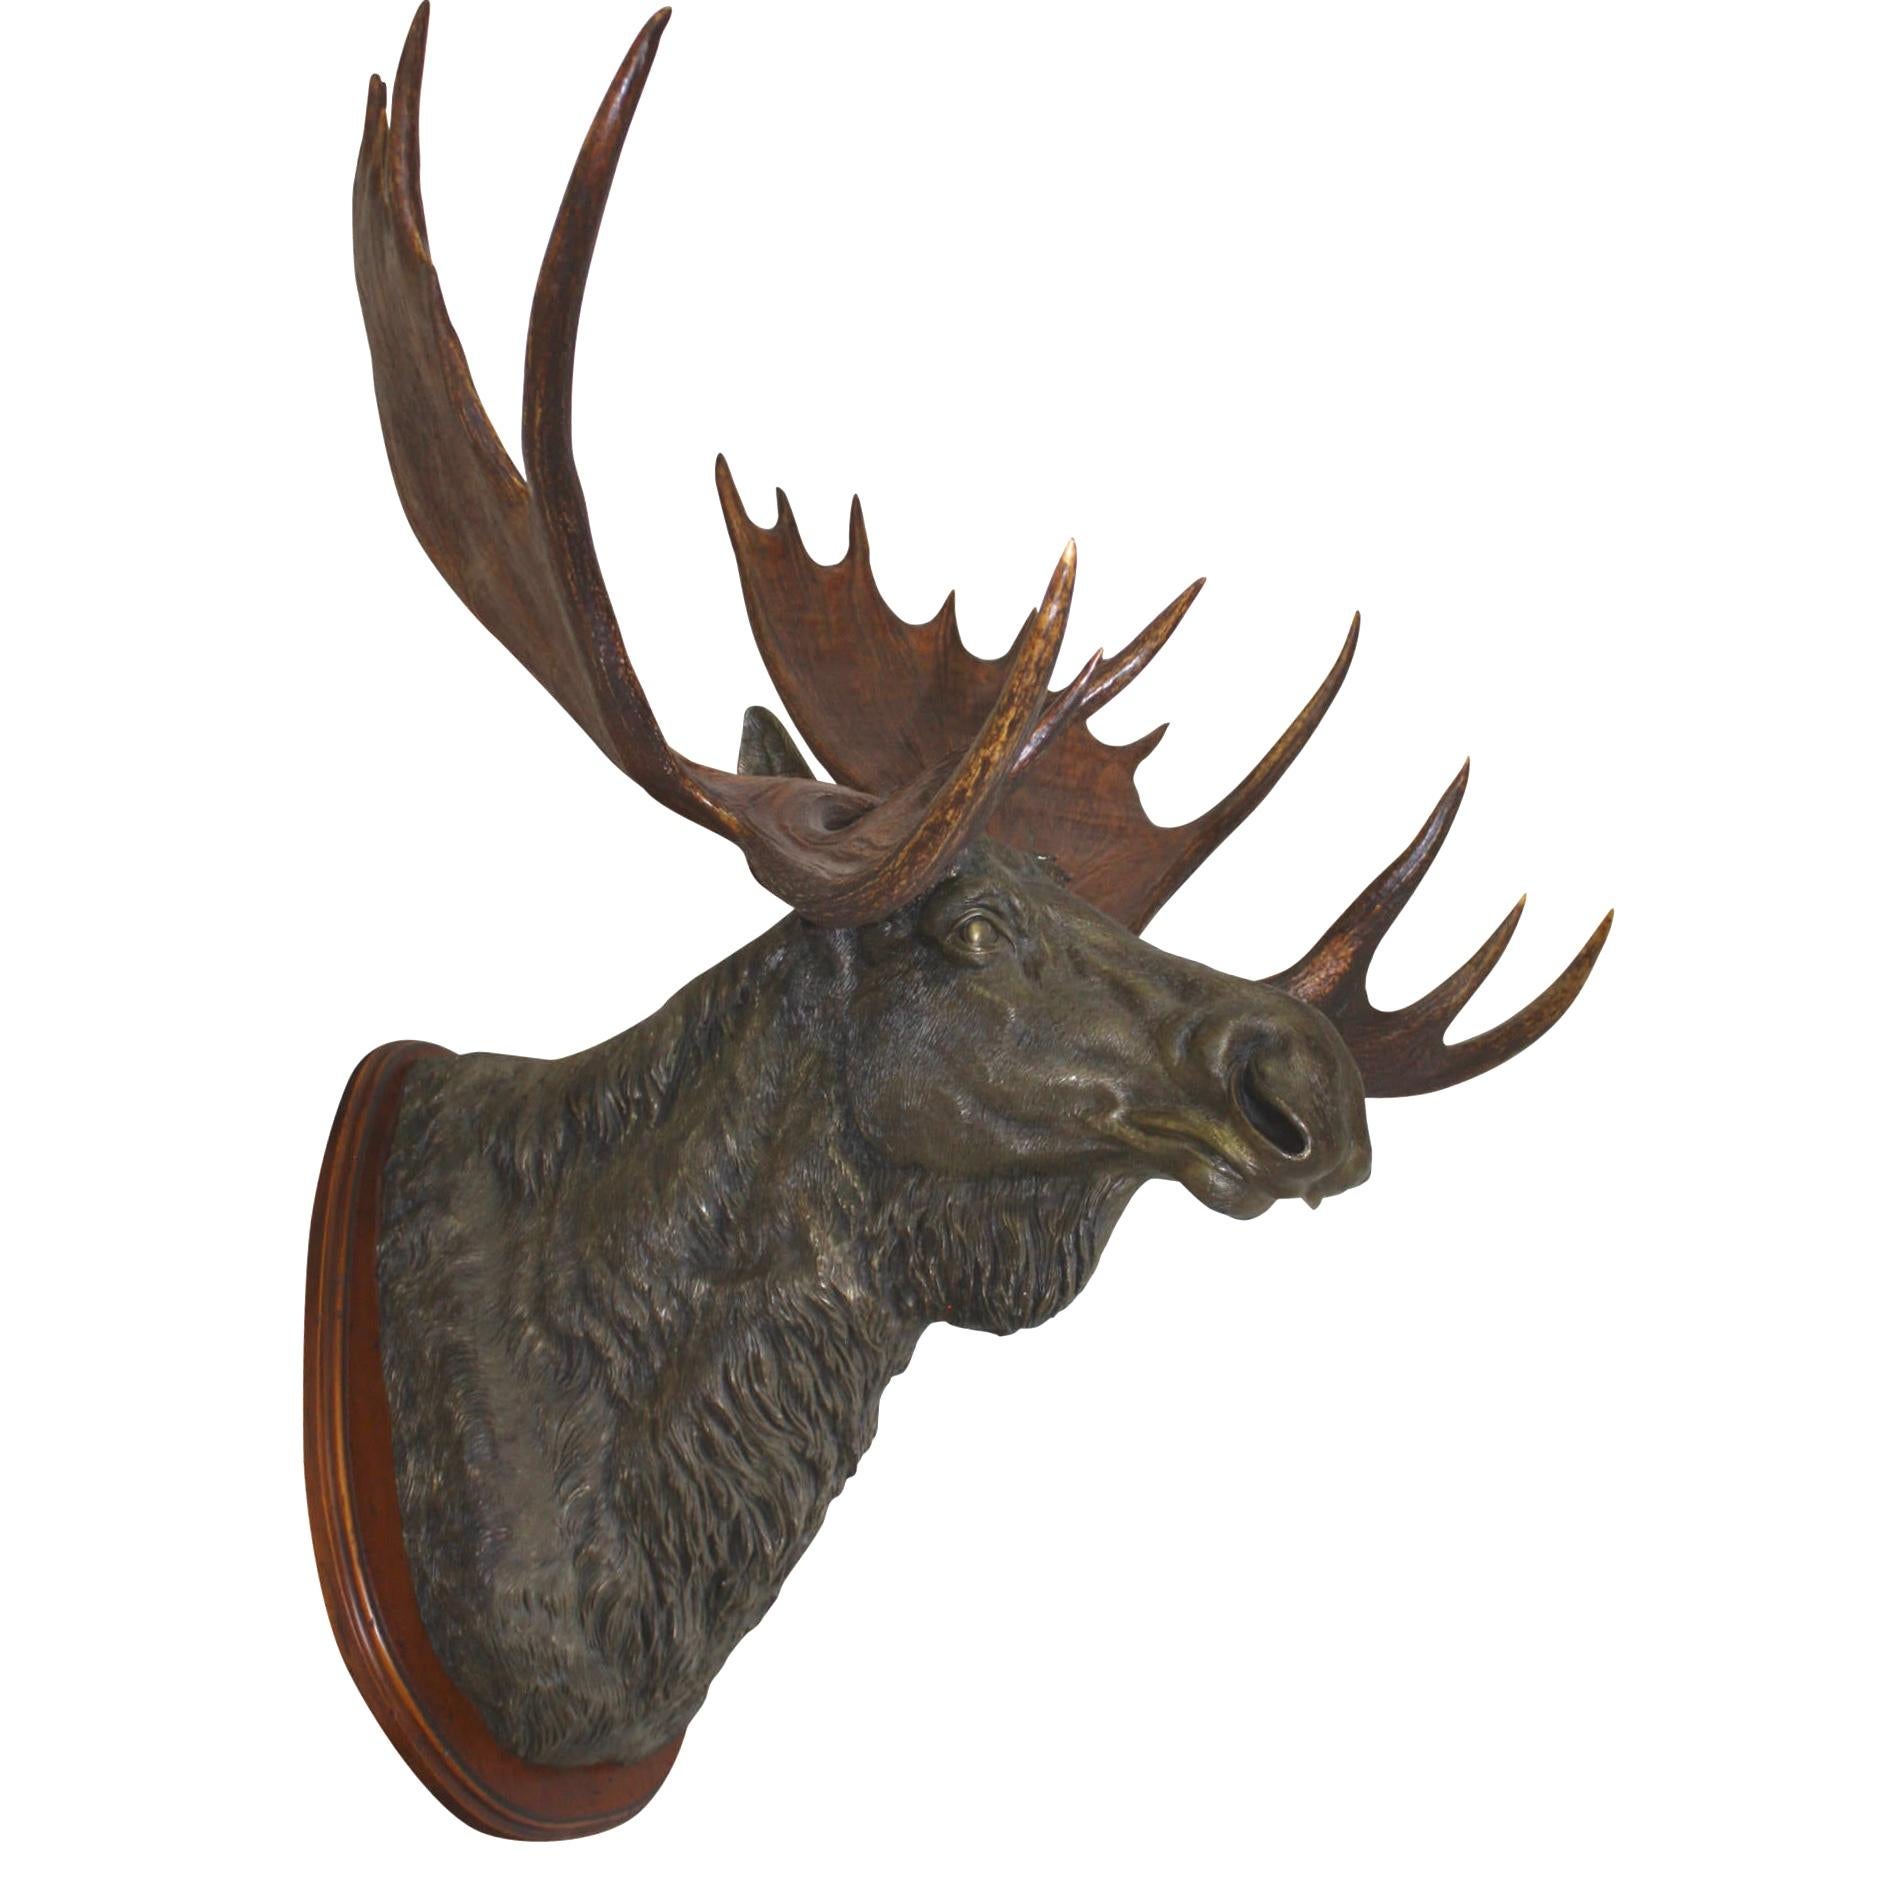 Expertly cast by artist Brad Ham, this sculpture showcases a bronze moose with American moose antlers mounted on a walnut plaque in a large, aggressive, forward facing position. Antlers were naturally shed and harvested.

